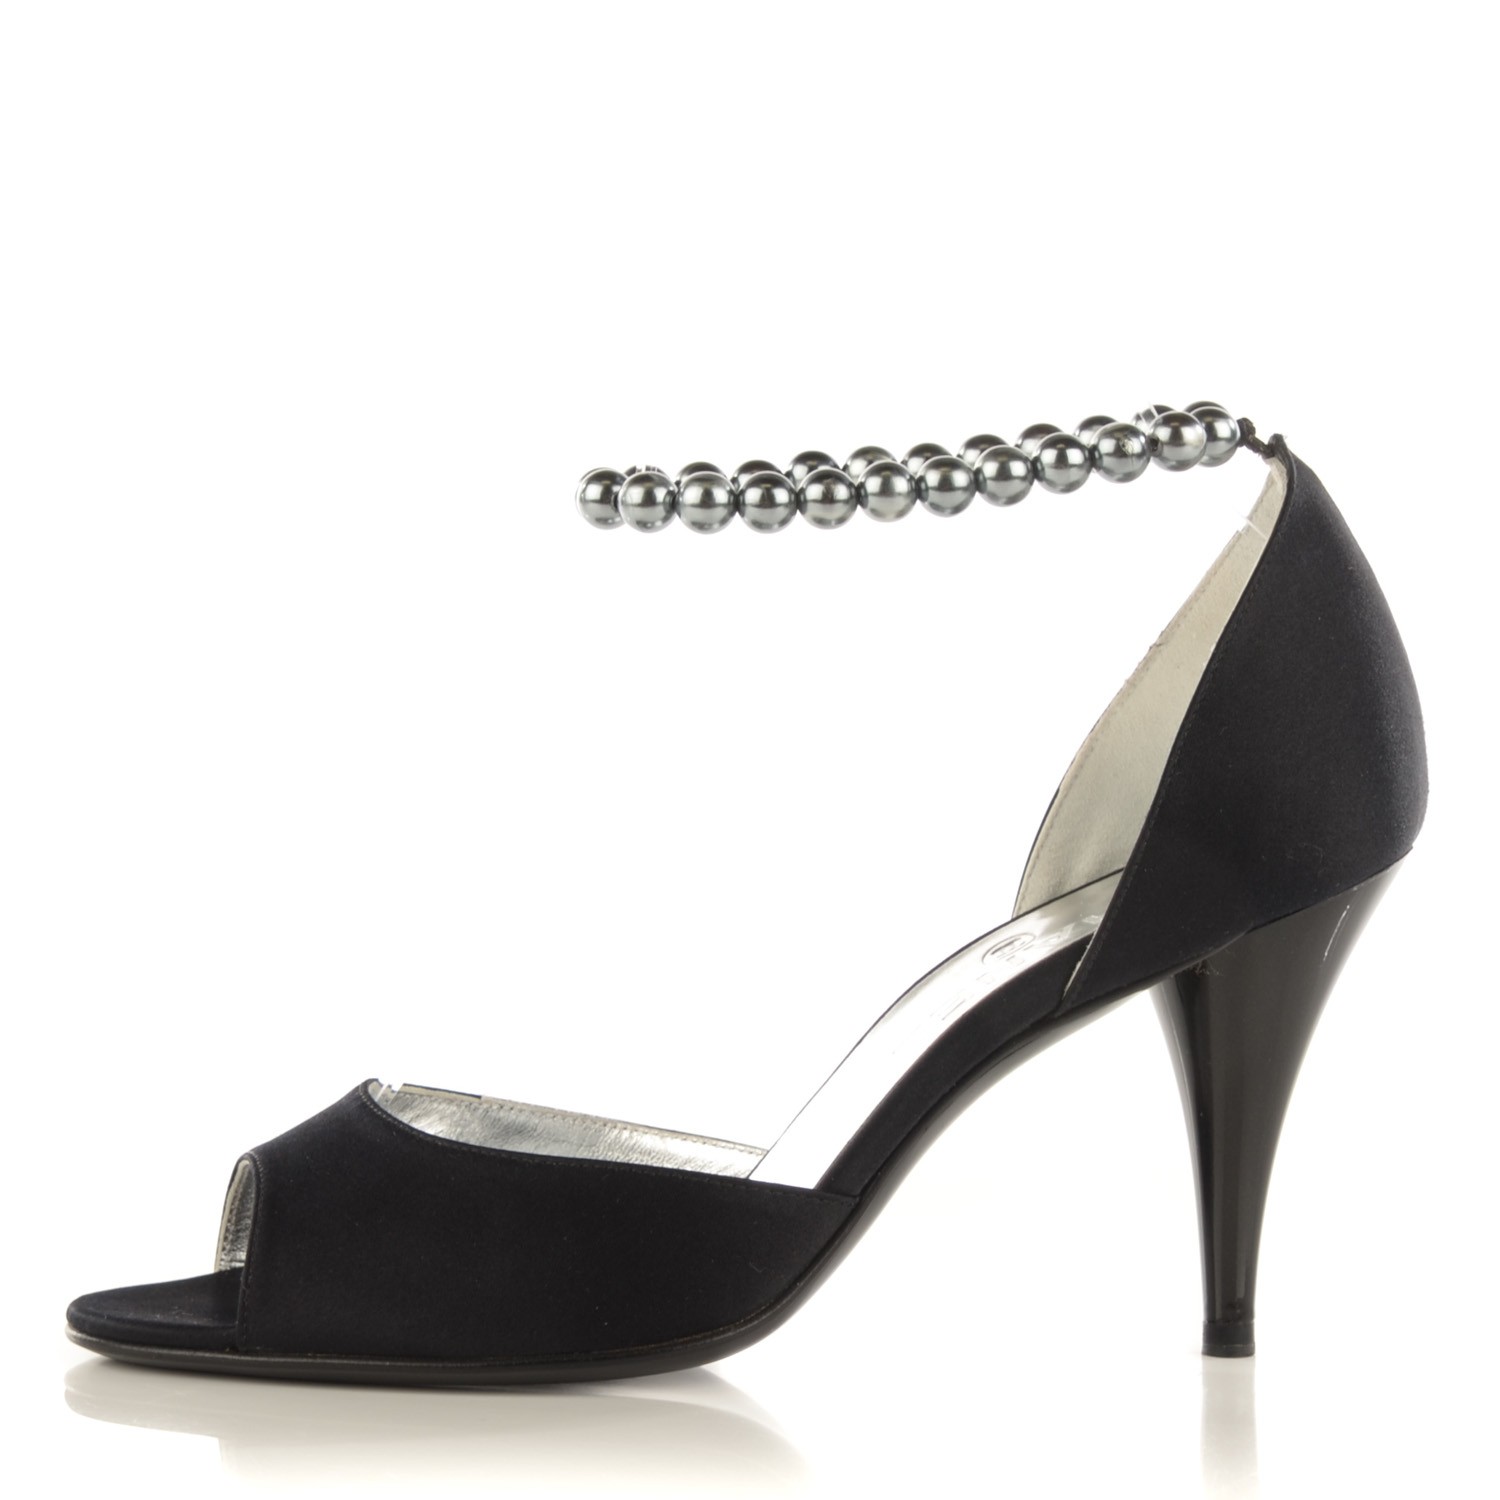 black heels with pearl ankle strap